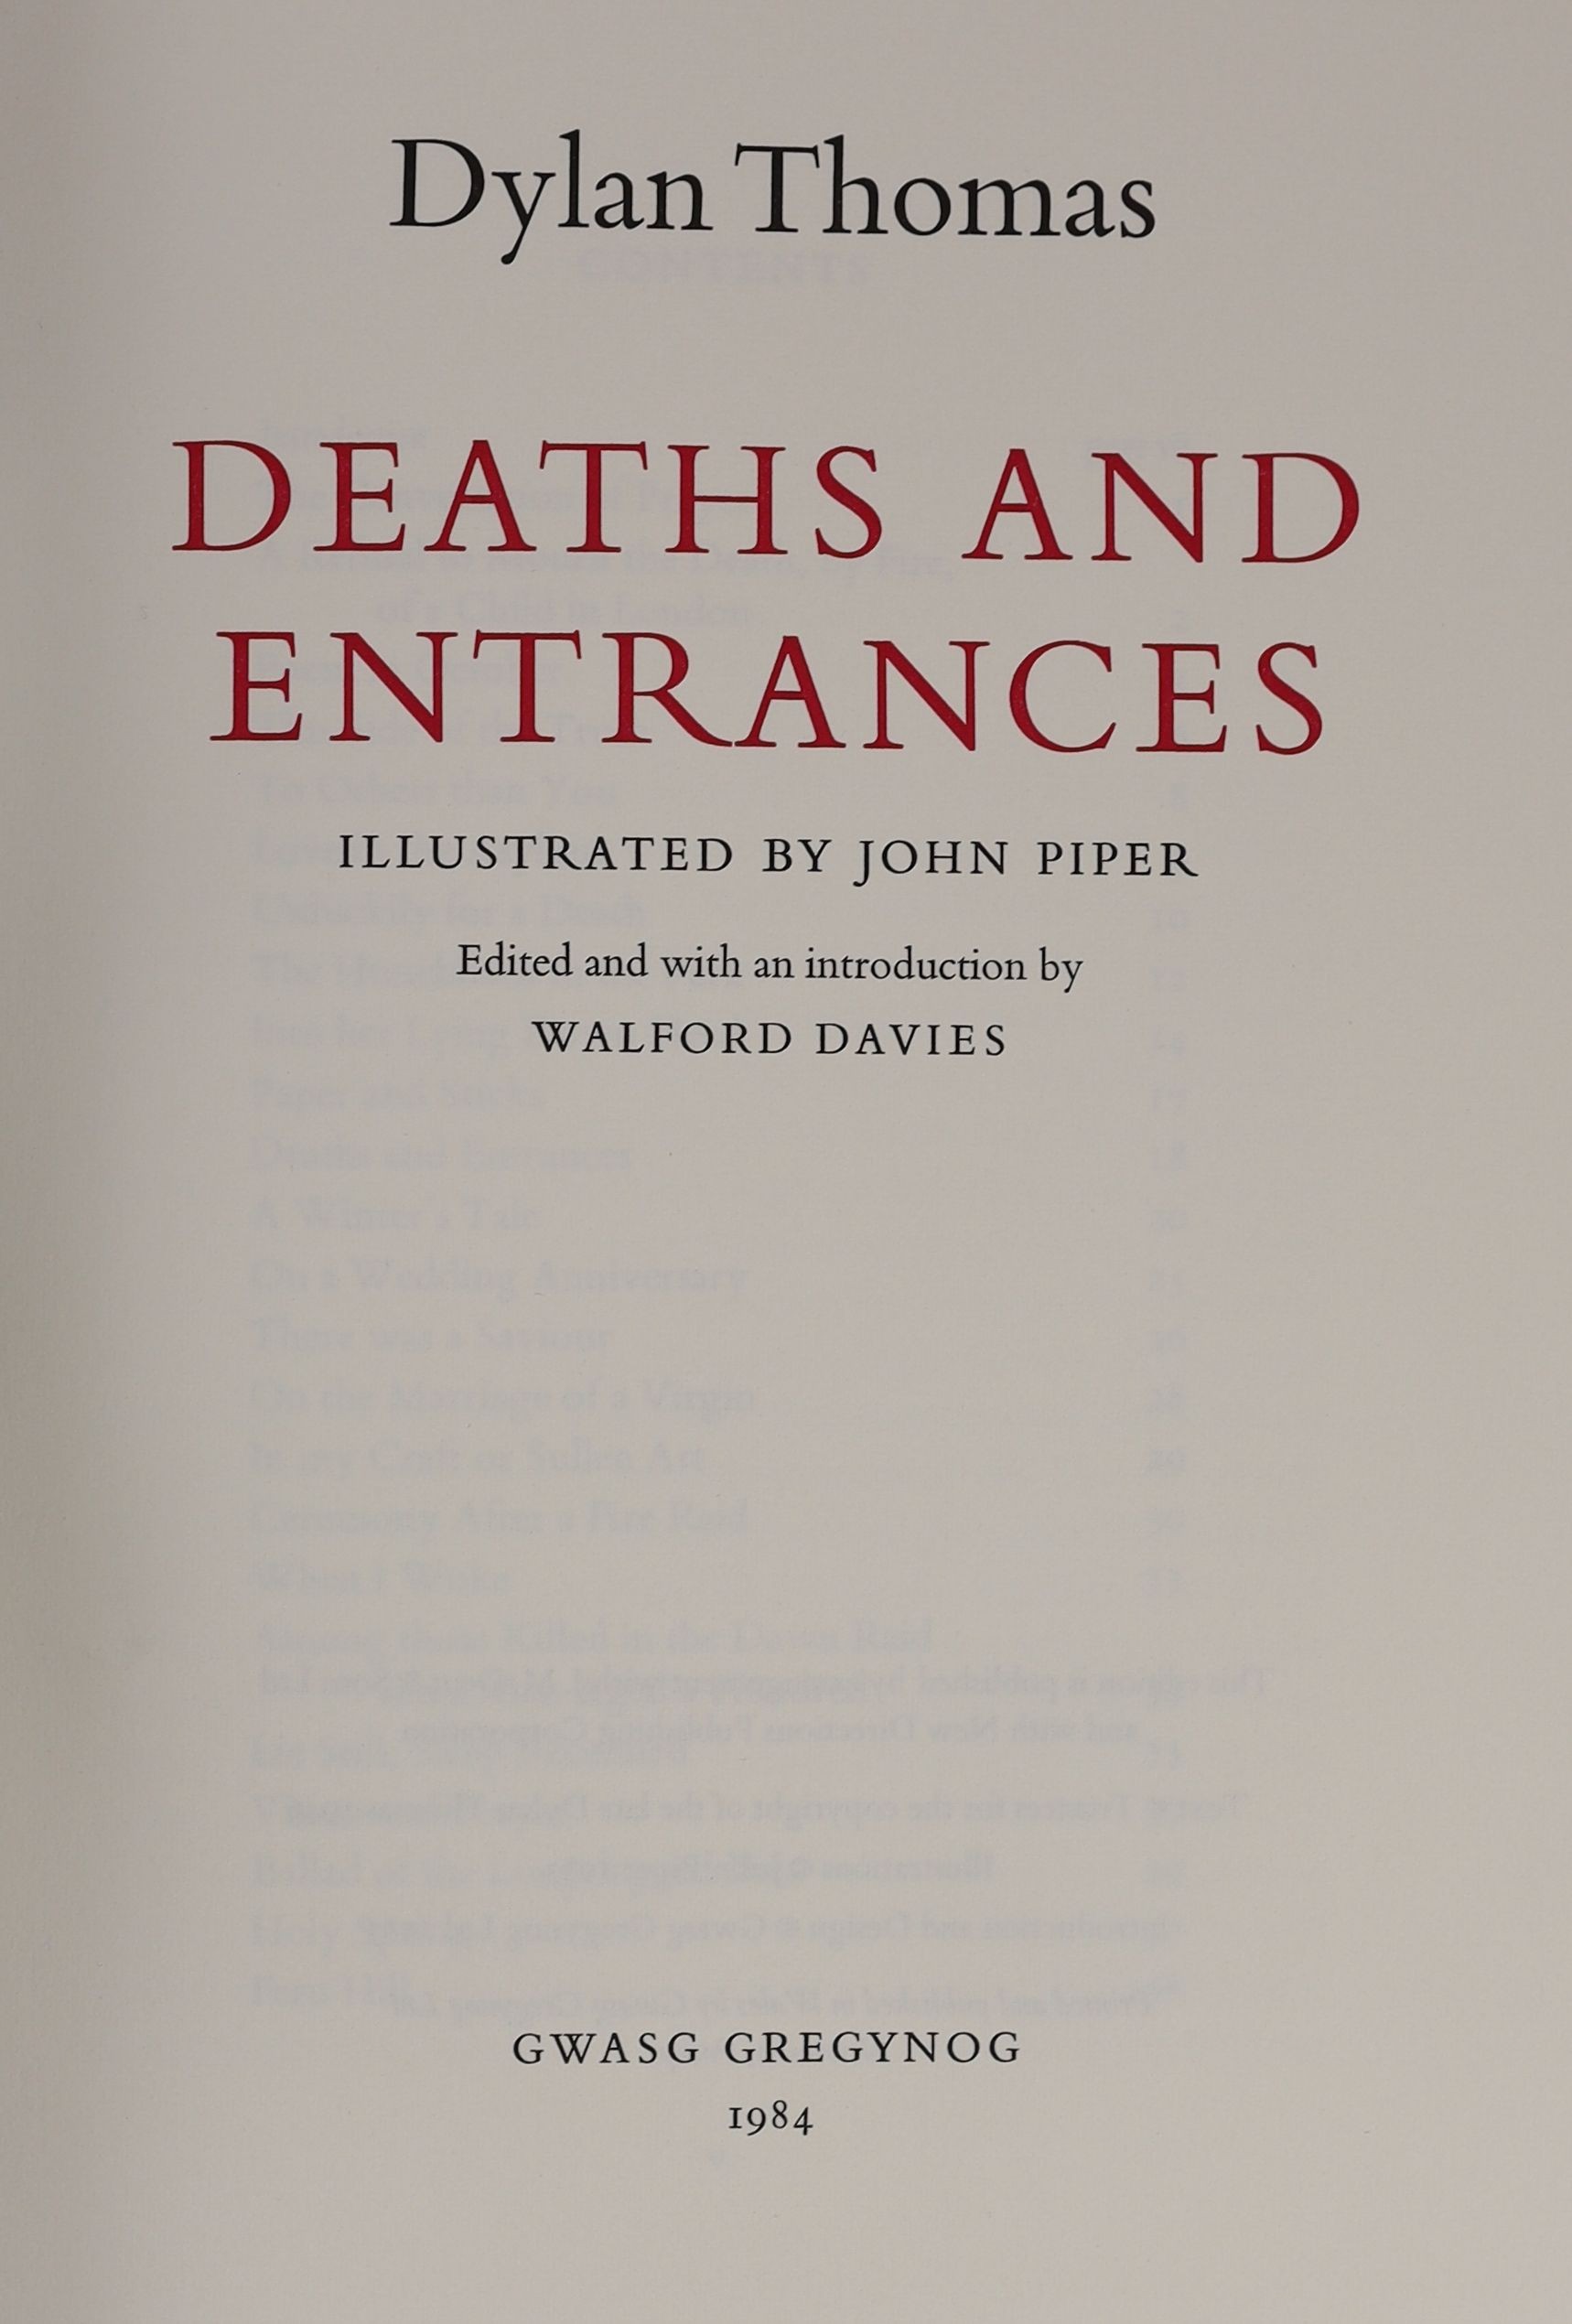 Thomas, Dylan - Deaths and Entrances, one of 250, edited by Walford Davies, illustrated by John Piper with 7 colour plates, folio, original morocco-backed cloth, Gwasg Gregynog, 1984, in slip case.